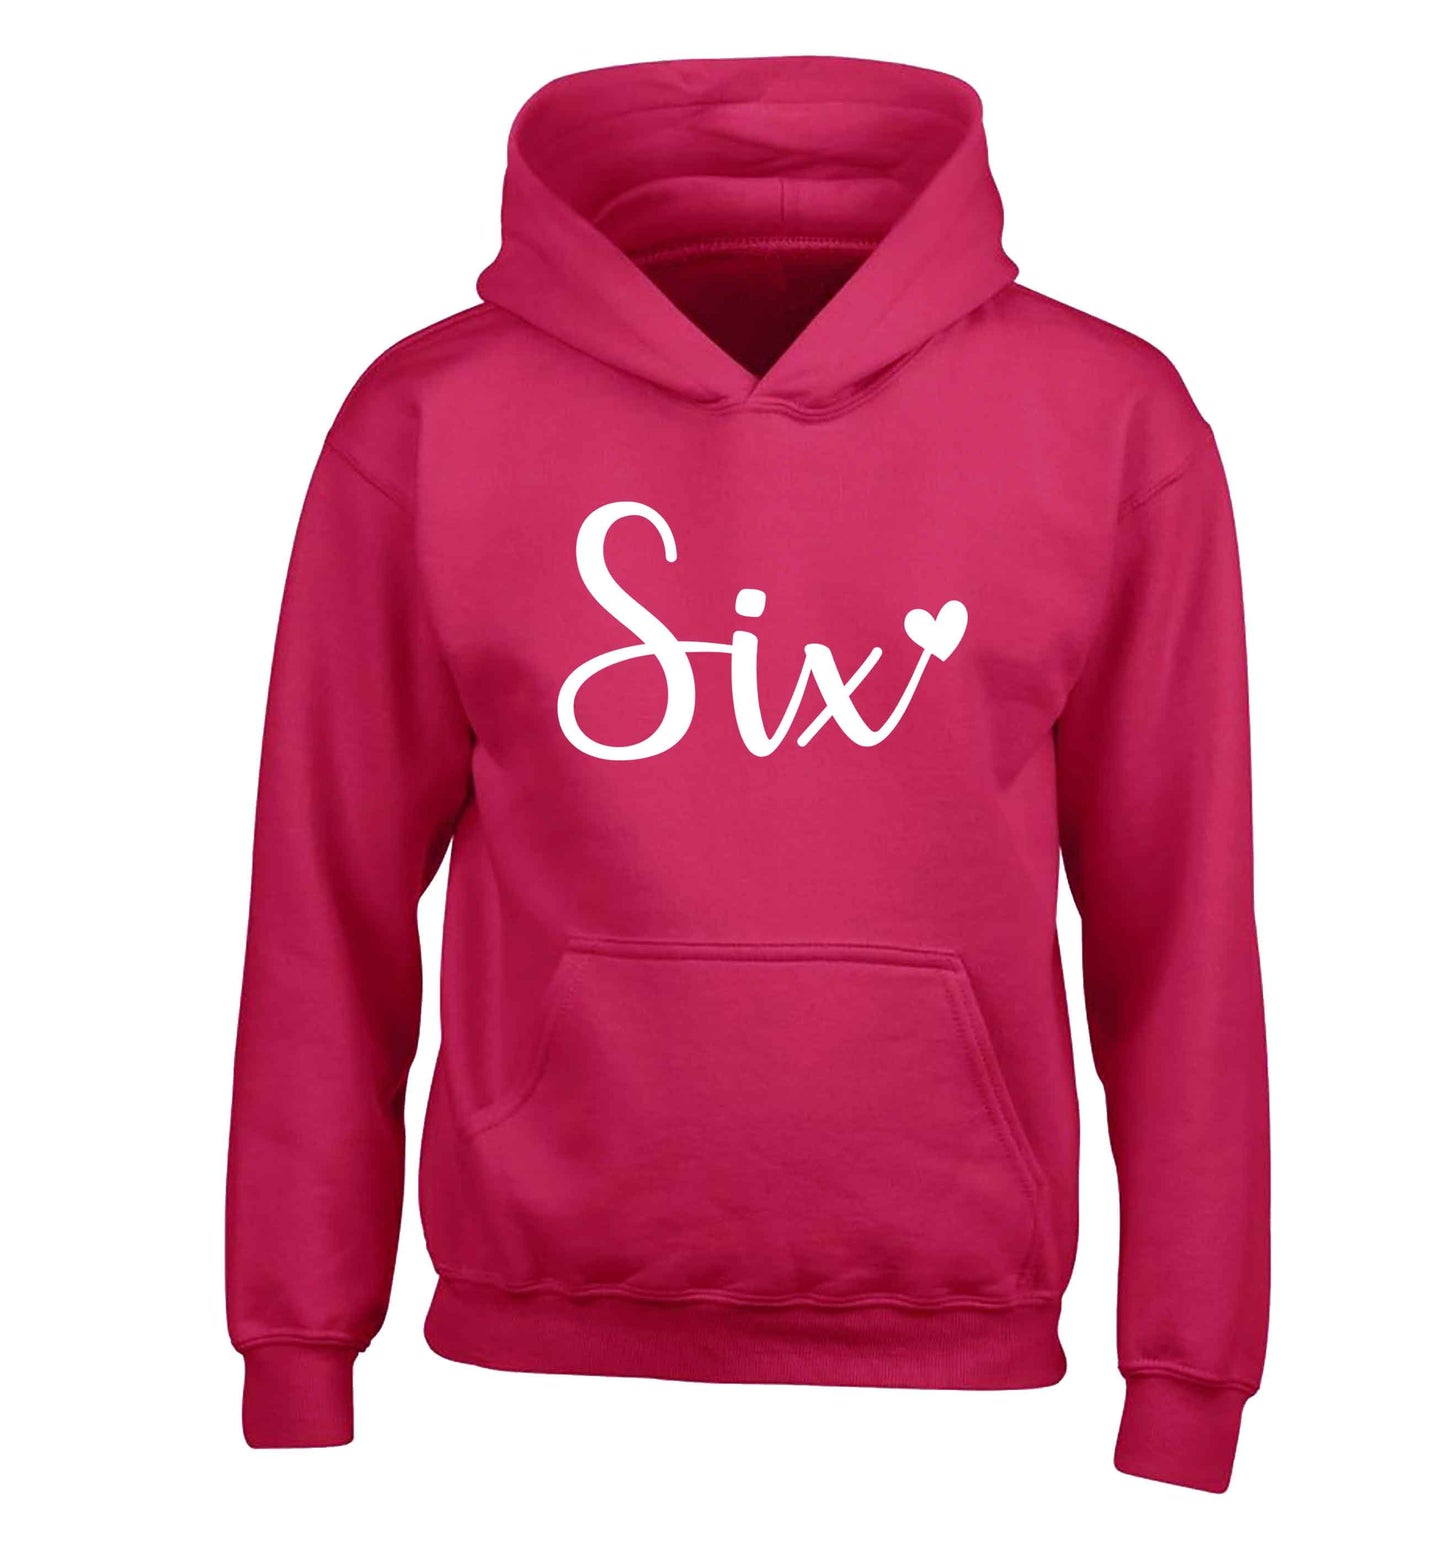 Six and heart! children's pink hoodie 12-13 Years